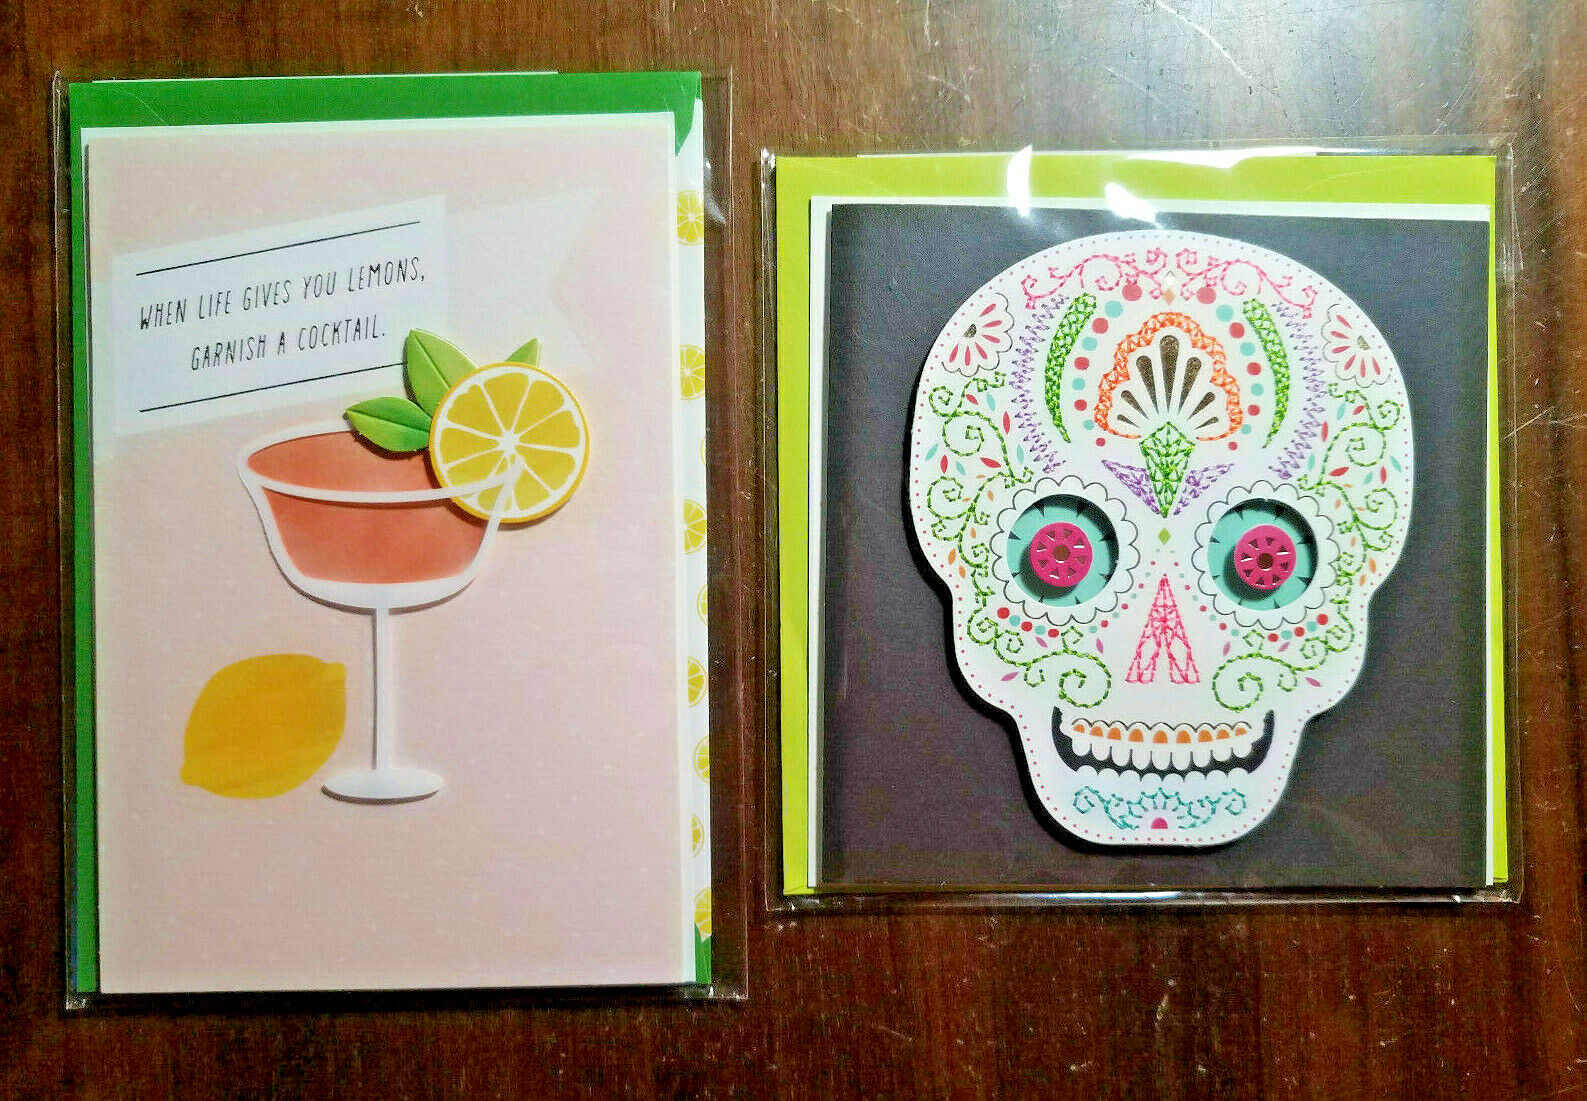 2 COPE BLANK Greeting Cards *SIGNATURE* Friend 5:00 margarita dotd dead embroide Без бренда